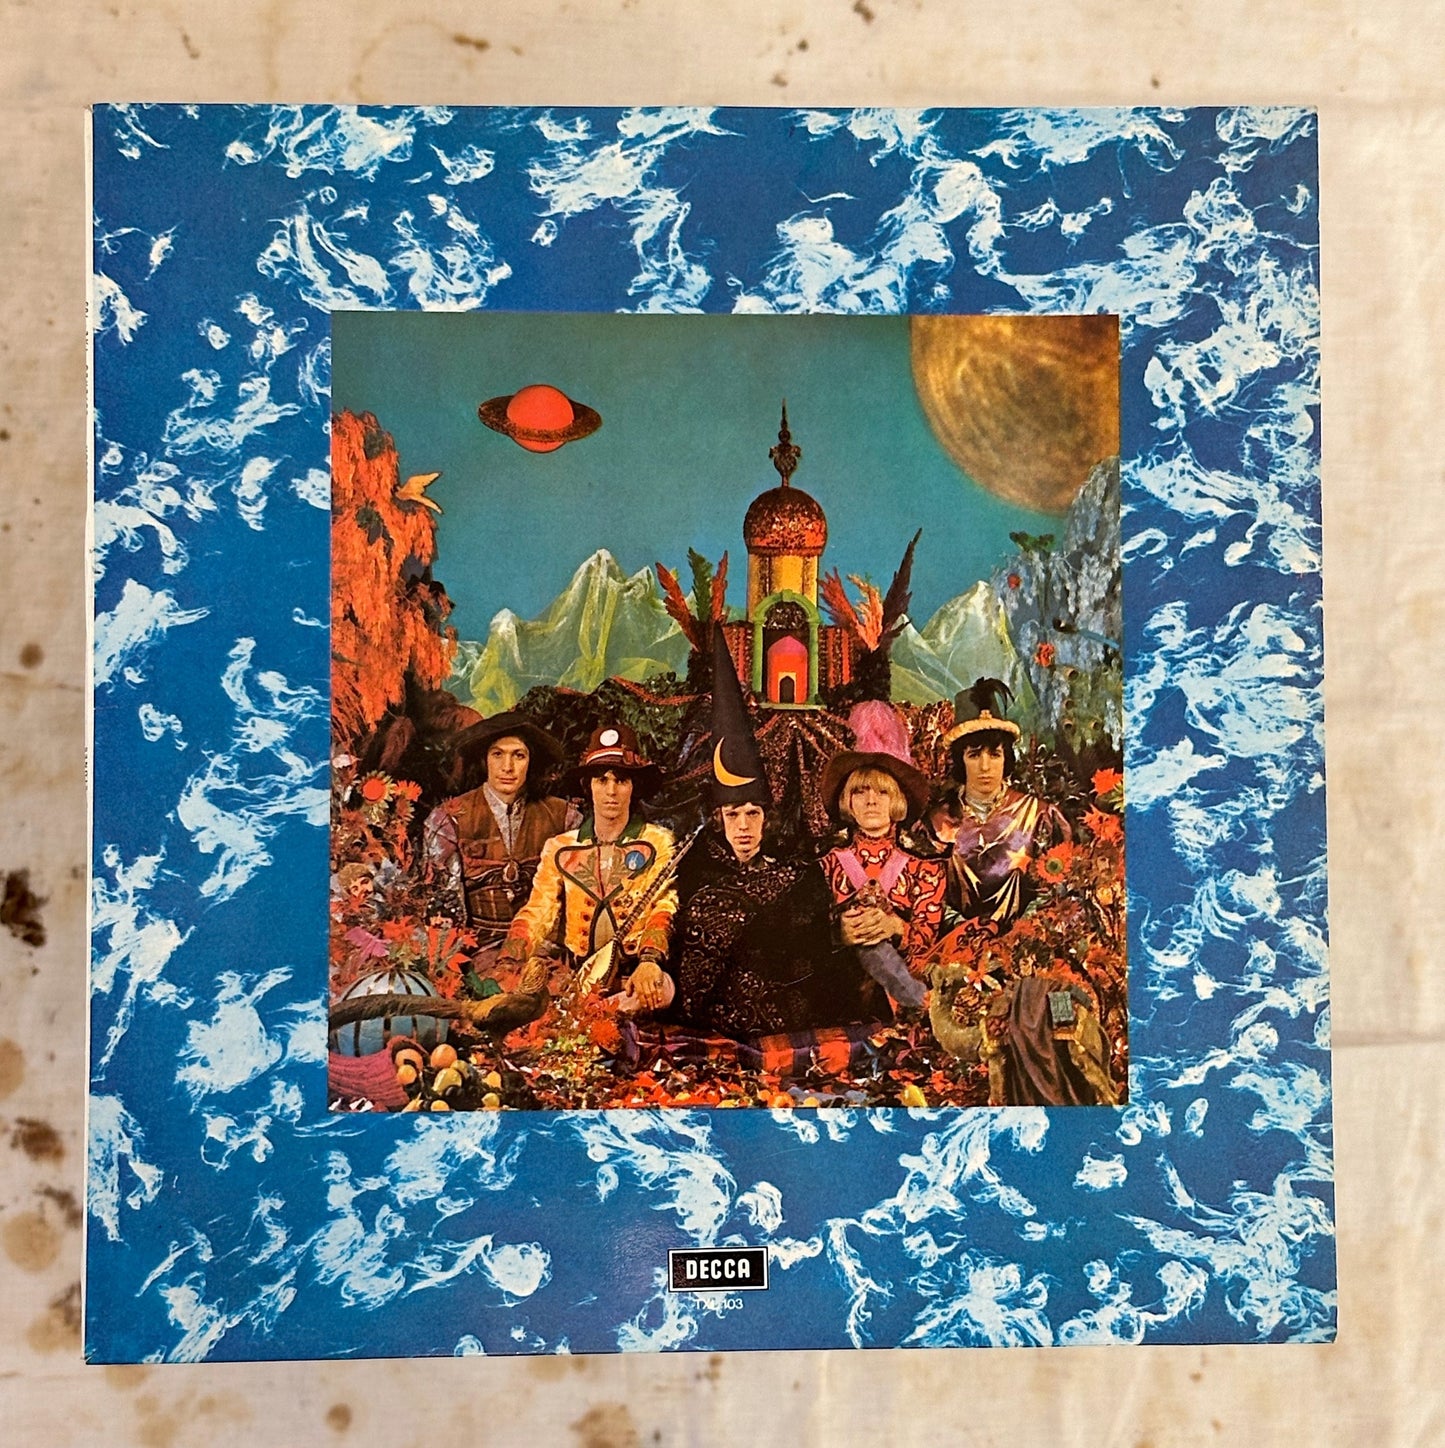 The Rolling Stones / Their Satanic Majesties Request LP